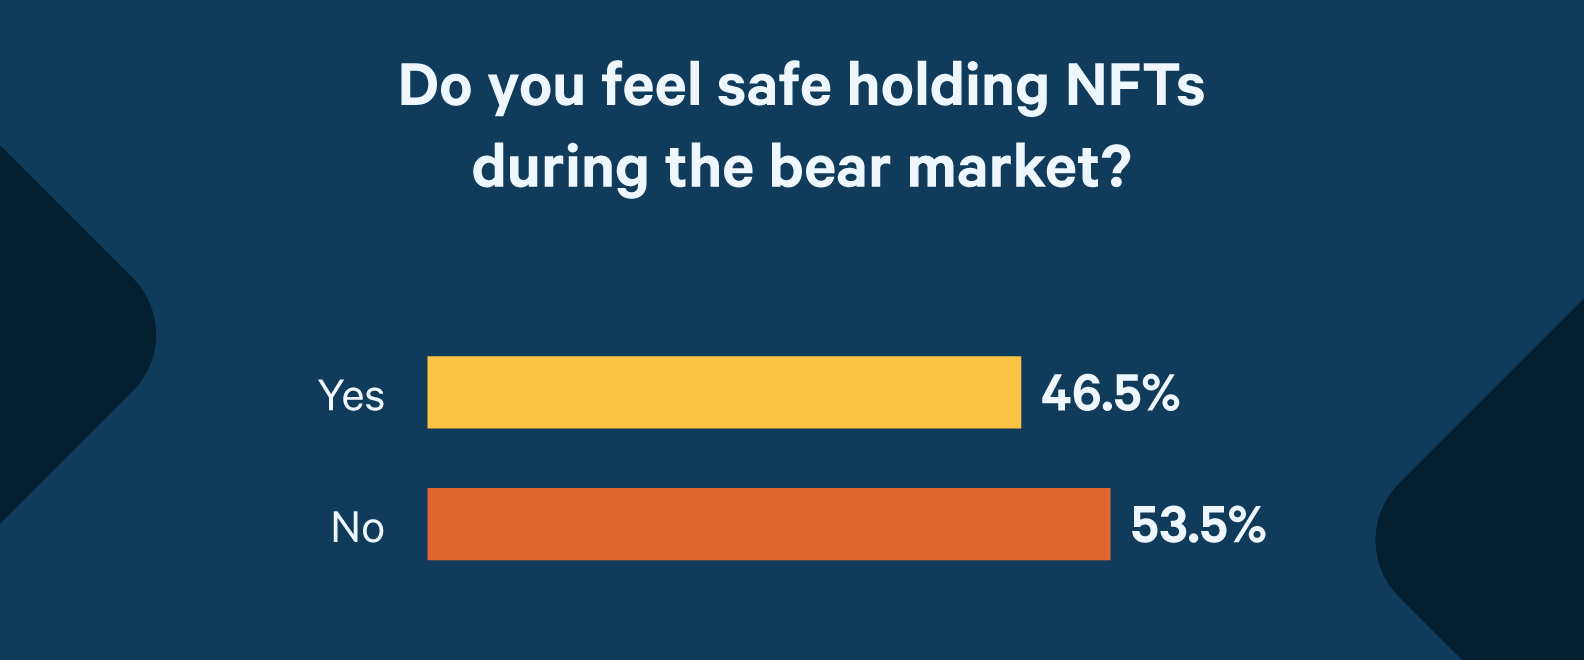 Poll results "do you feel safe holding NFTs"